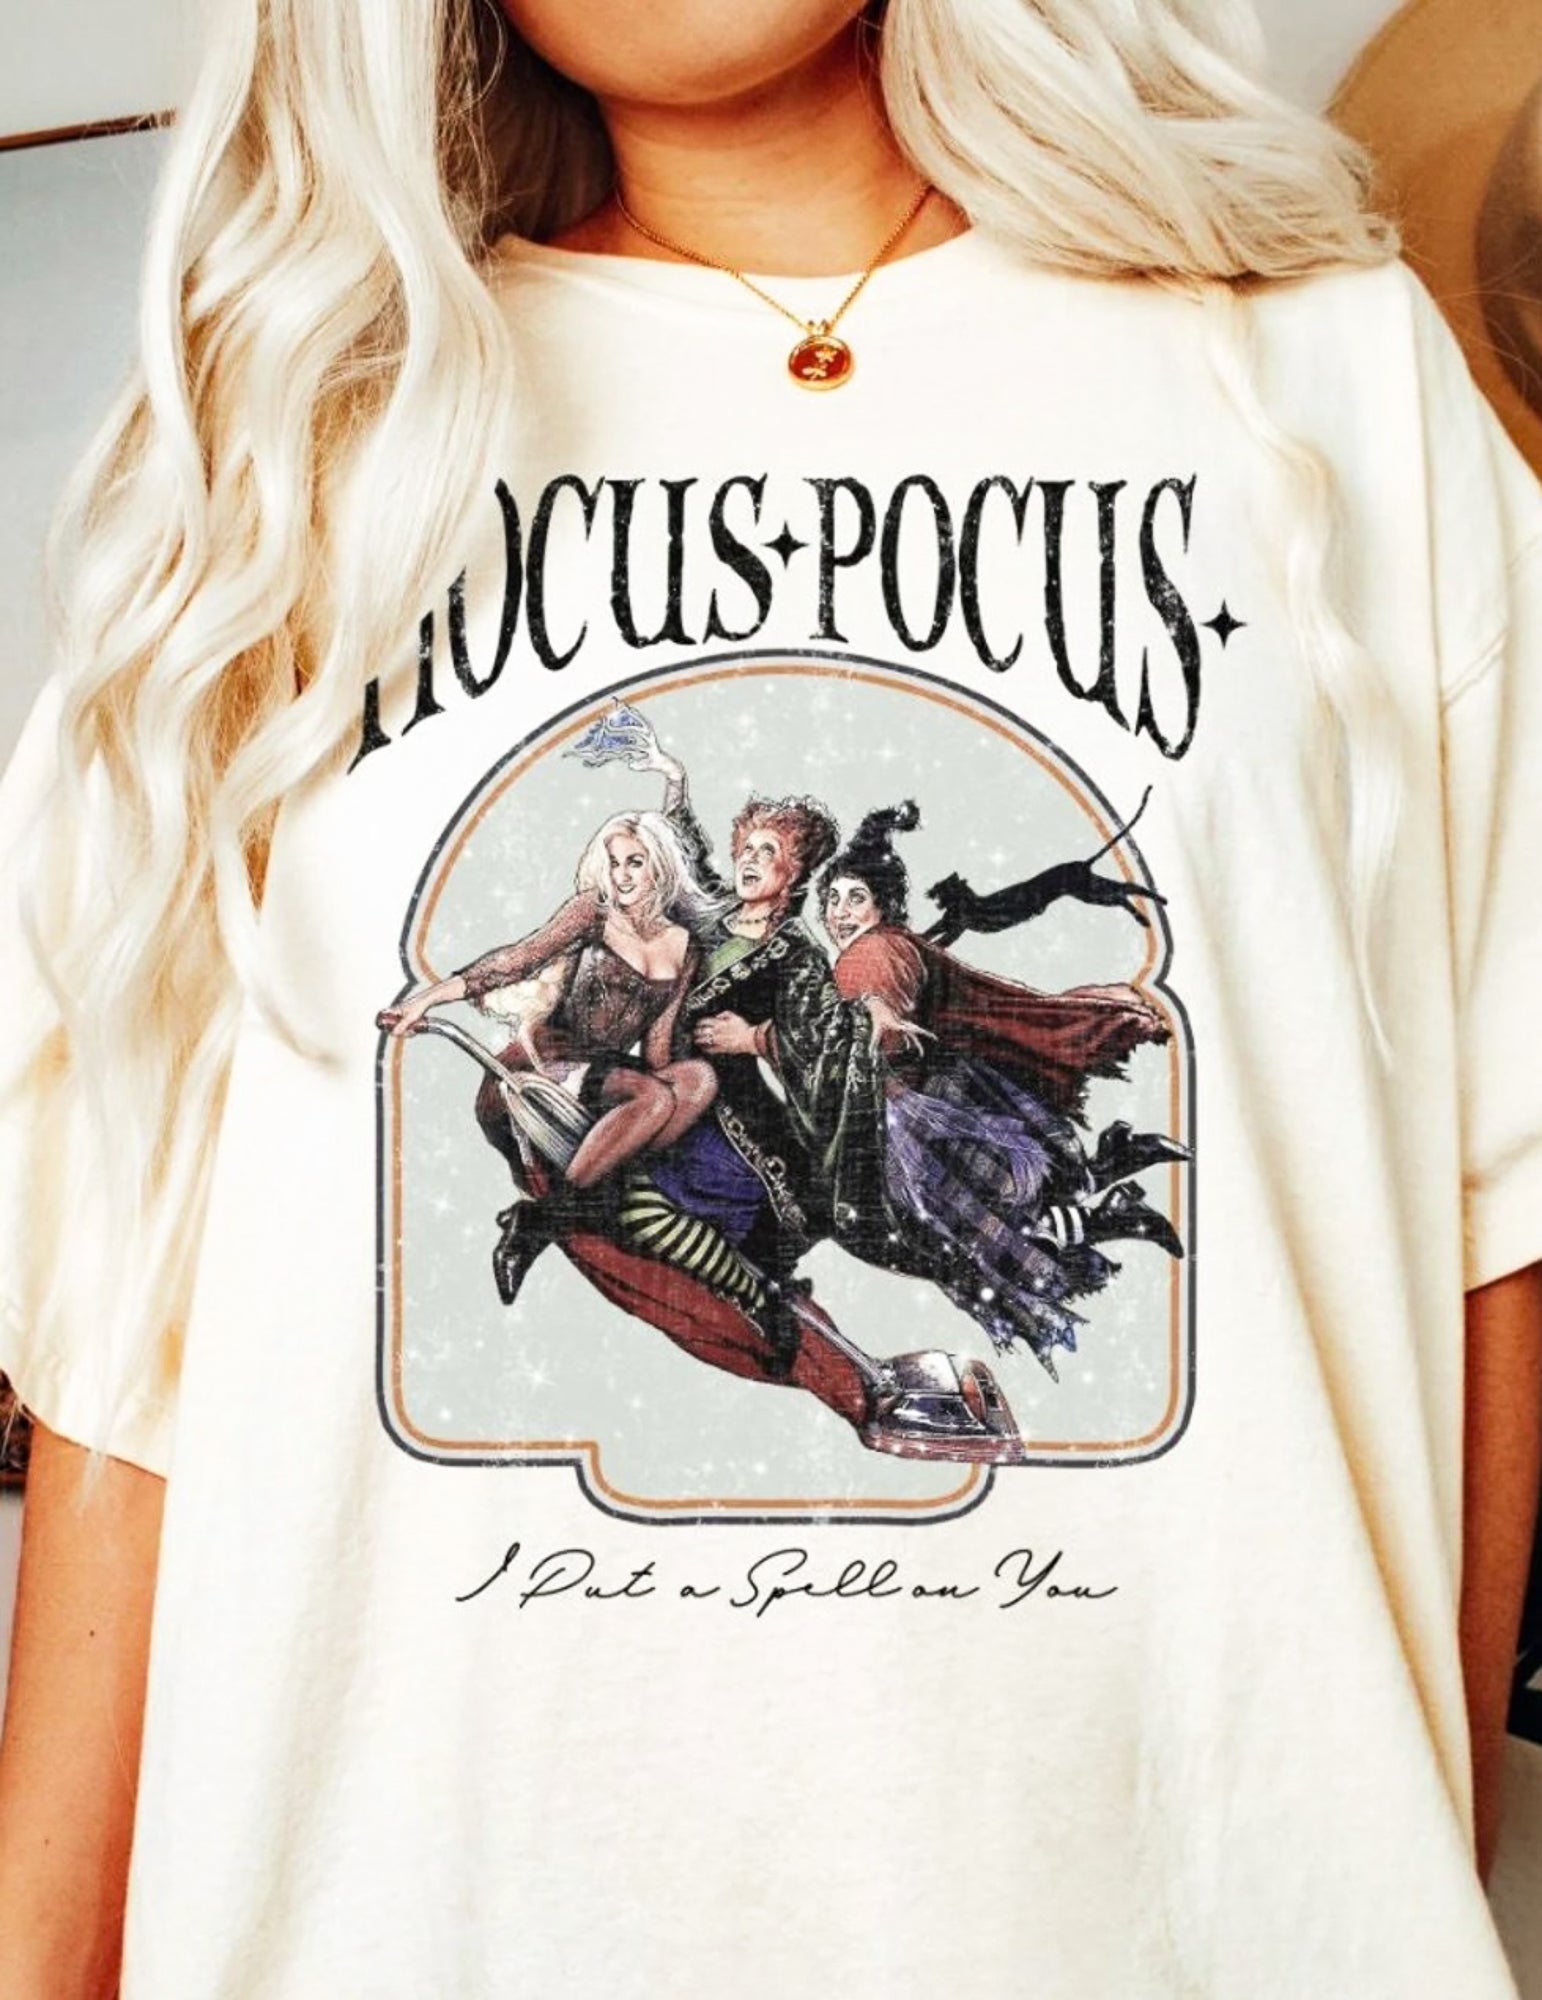 I Put a Spell On You Shirt @ That Awesome Shirt!